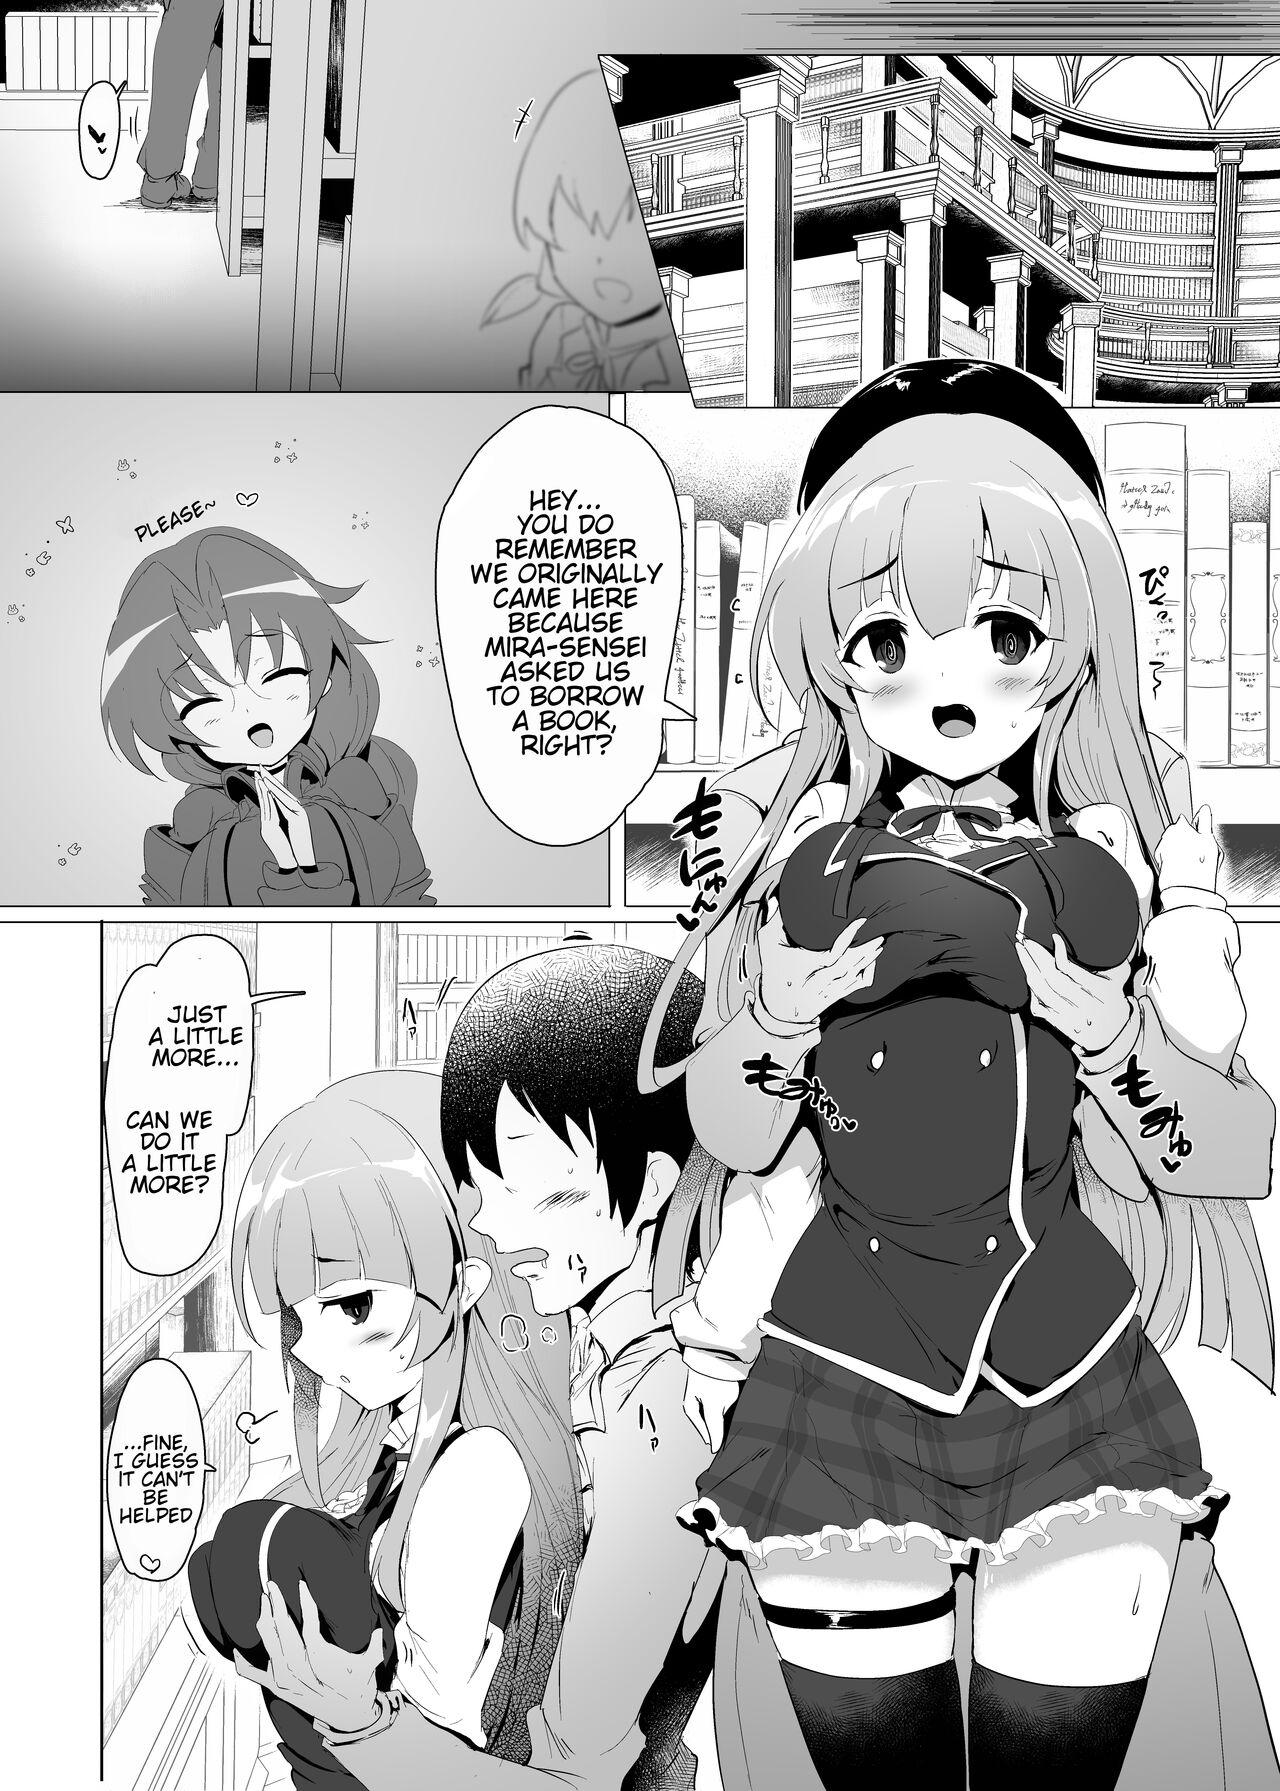 Tits There's No Way An Ecchi Event Will Happen Between Me and the Princess of Manaria Kingdom! 2 - Manaria friends Cocksuckers - Page 10